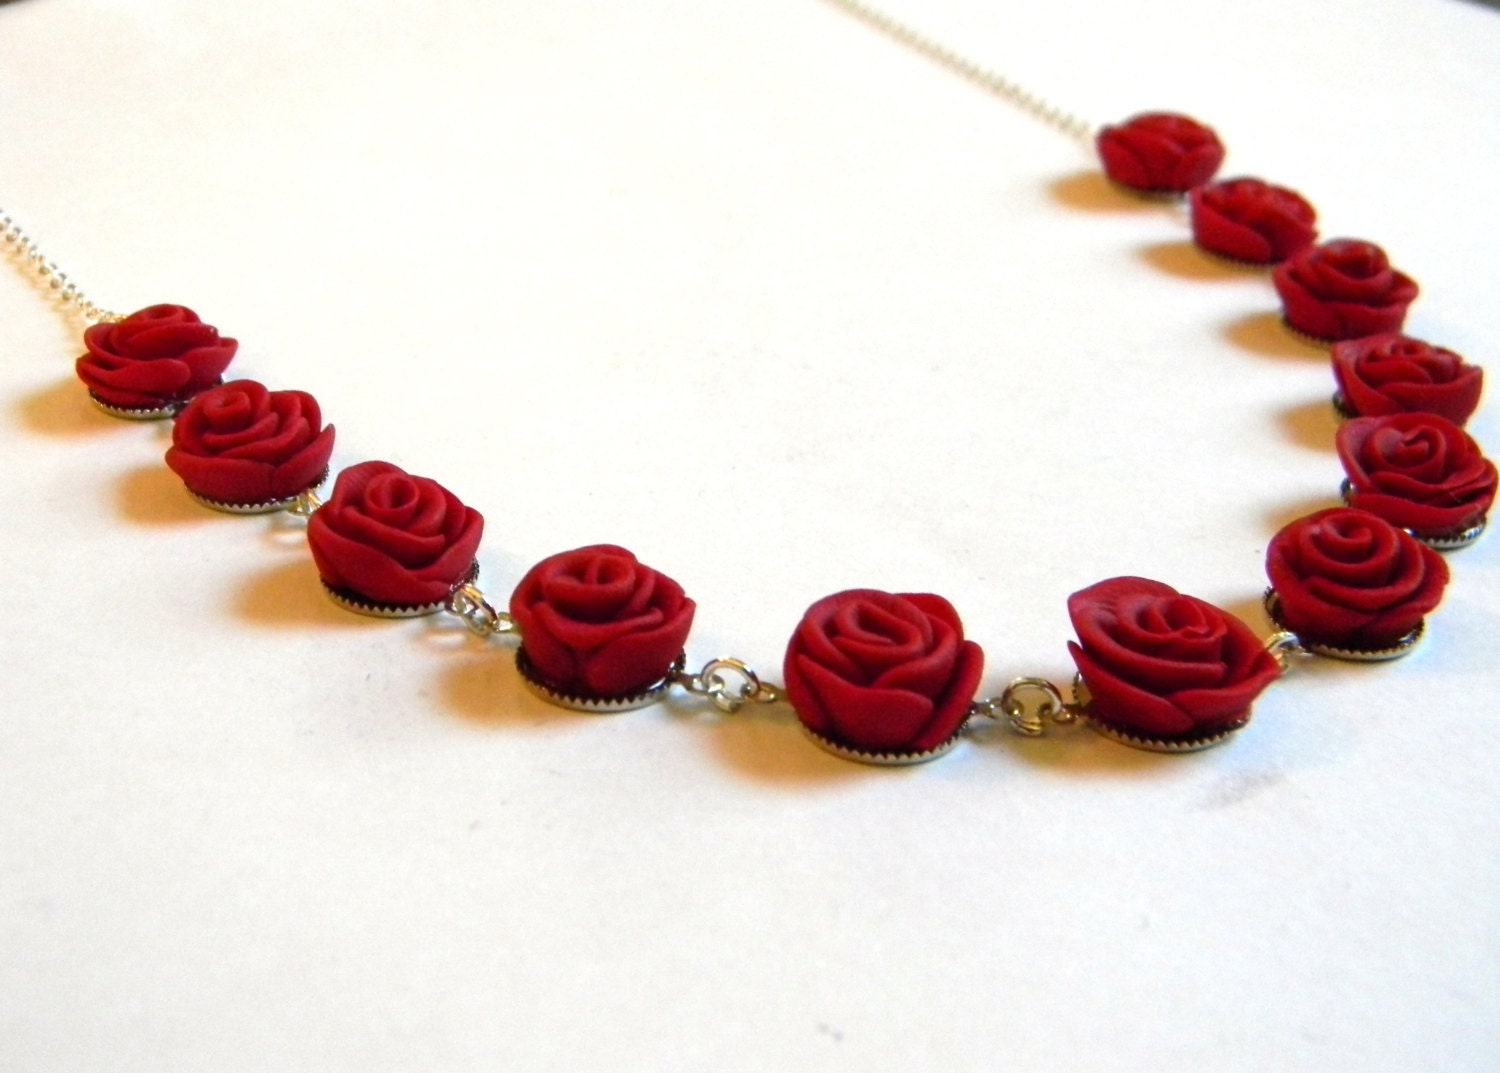 Valentines Day Jewelry - A Dozen Red Rose Link Necklace - Handmade Polymer Clay Flower Jewelry - Unique - Any Color - Gifts Under 20, 30 - SammysBeadworks